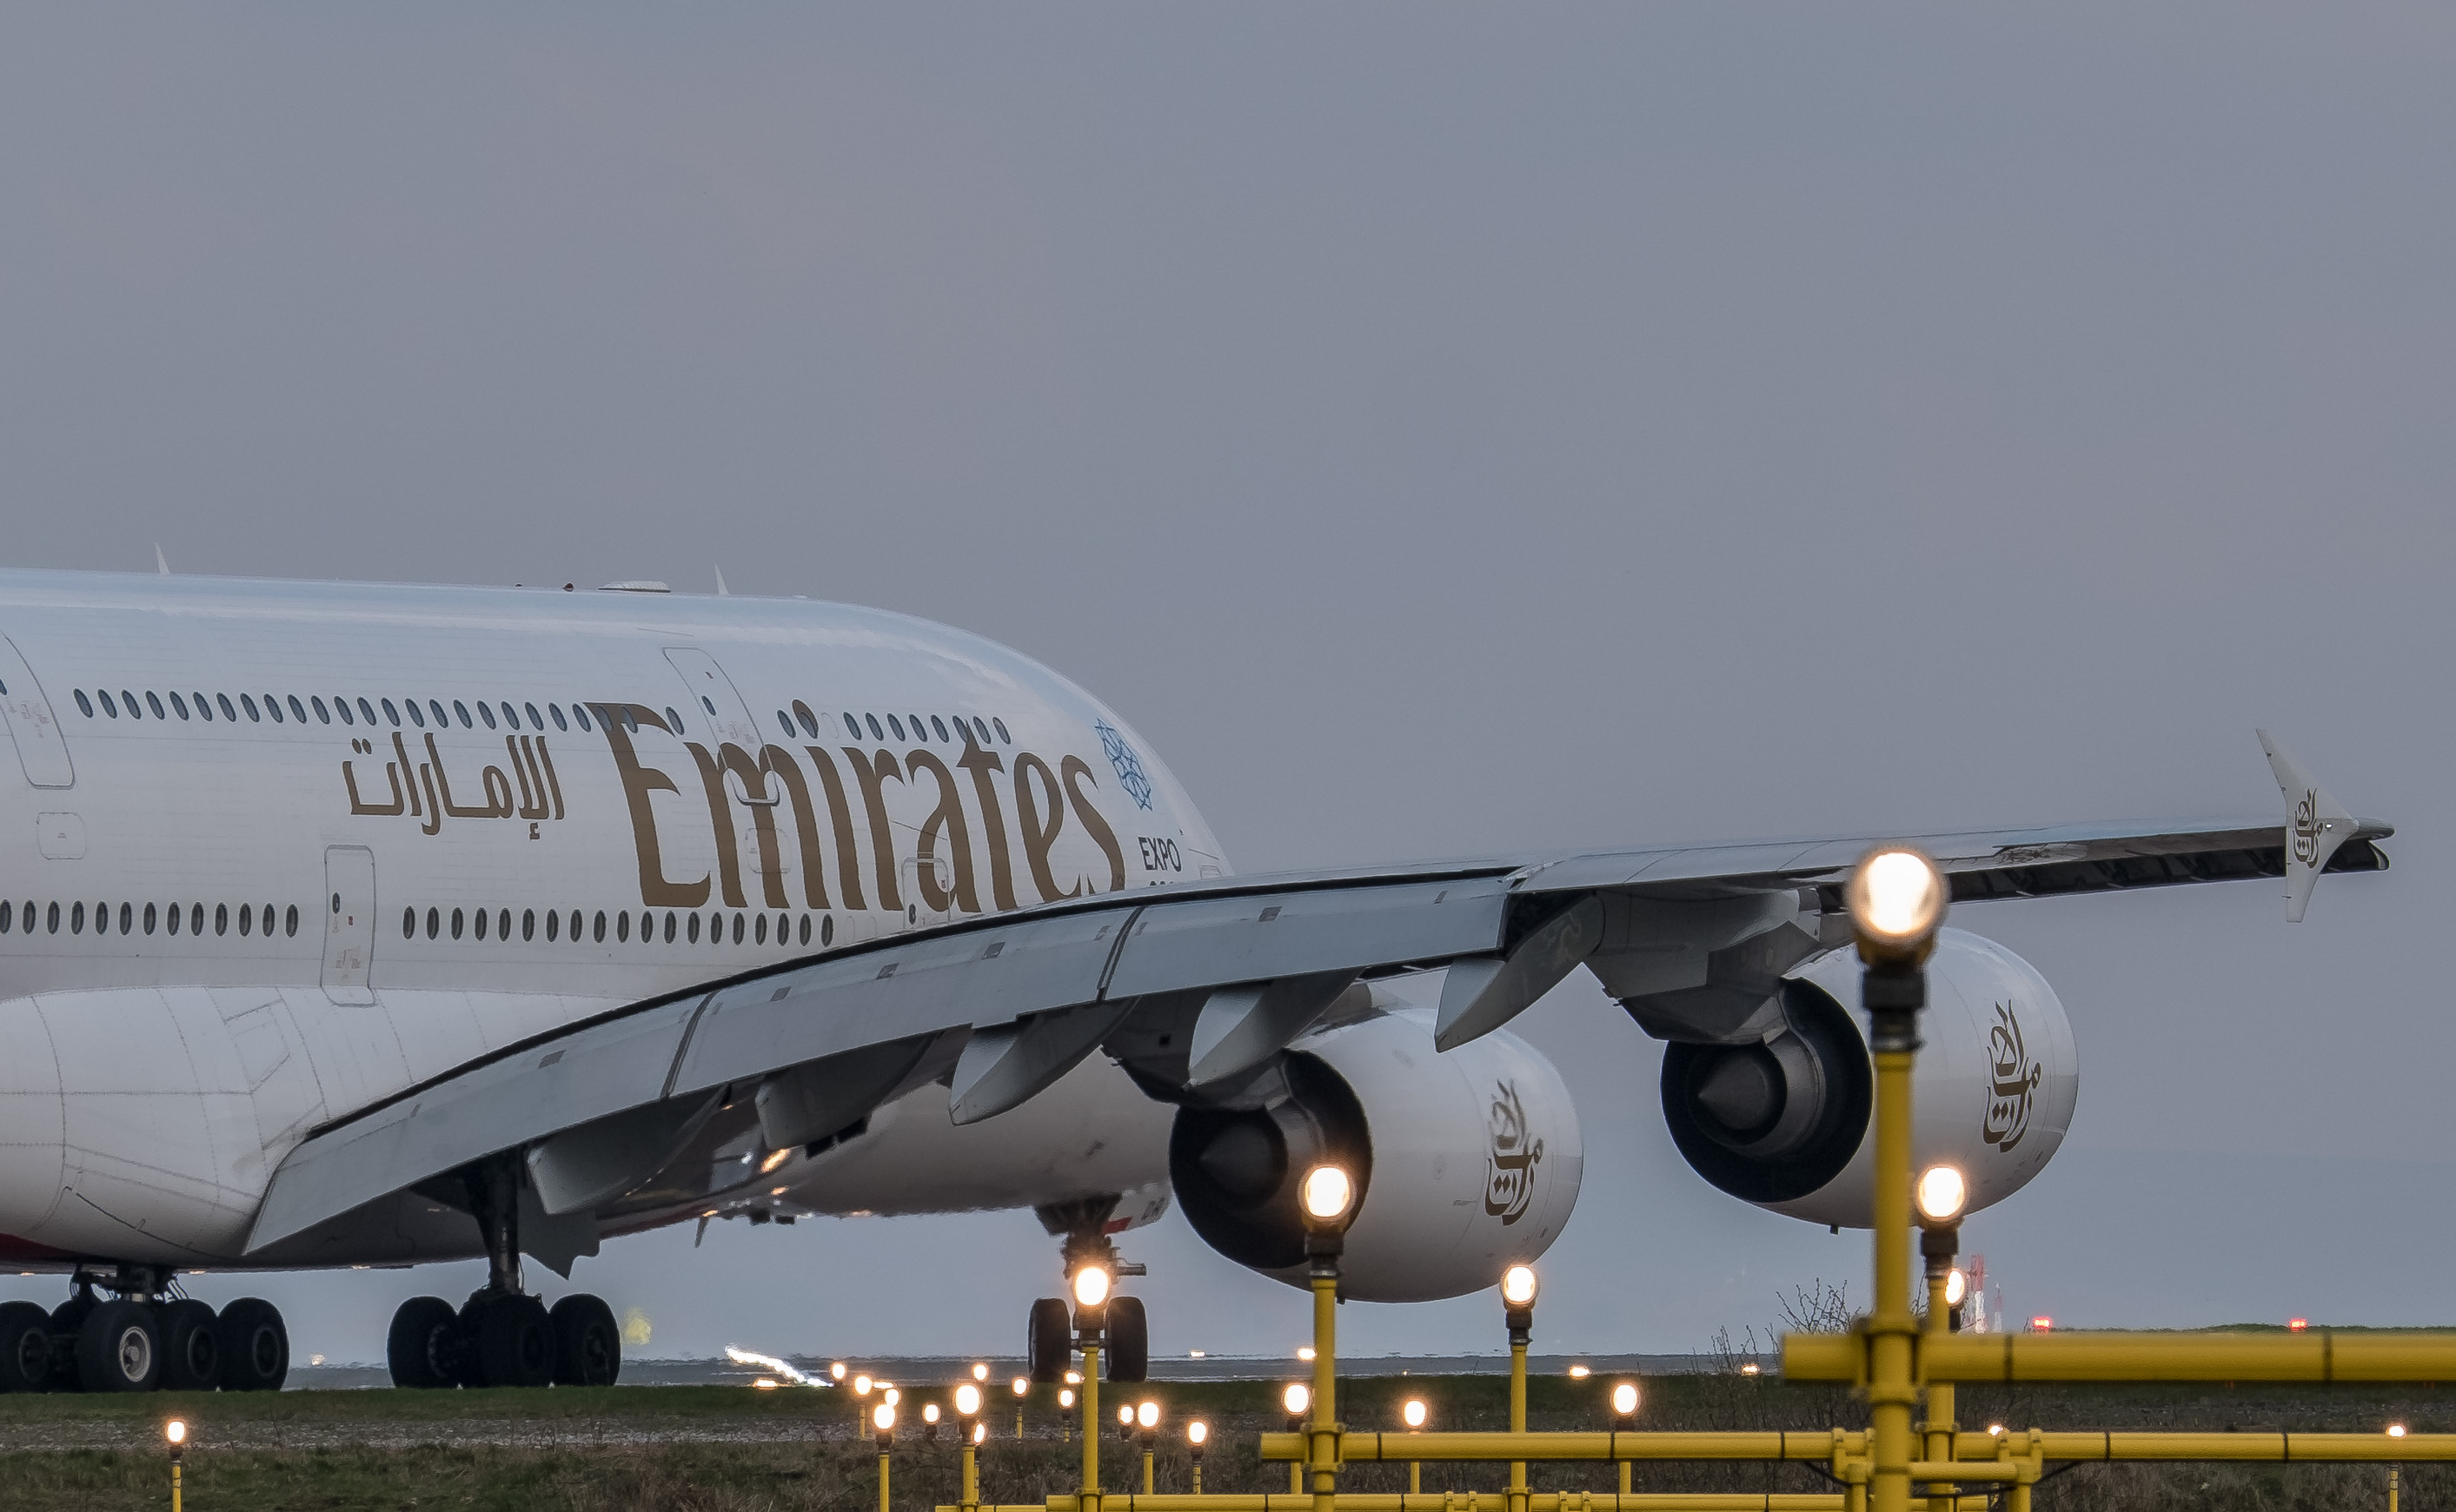 Wallpaper, Airbus, A manchester, manchesterairport, Dubai, General, electric, lineup, airplane, airlines, Emirates, 05l, runway, lights, epic, huge, enormous, wing, wingtip 2826x1740